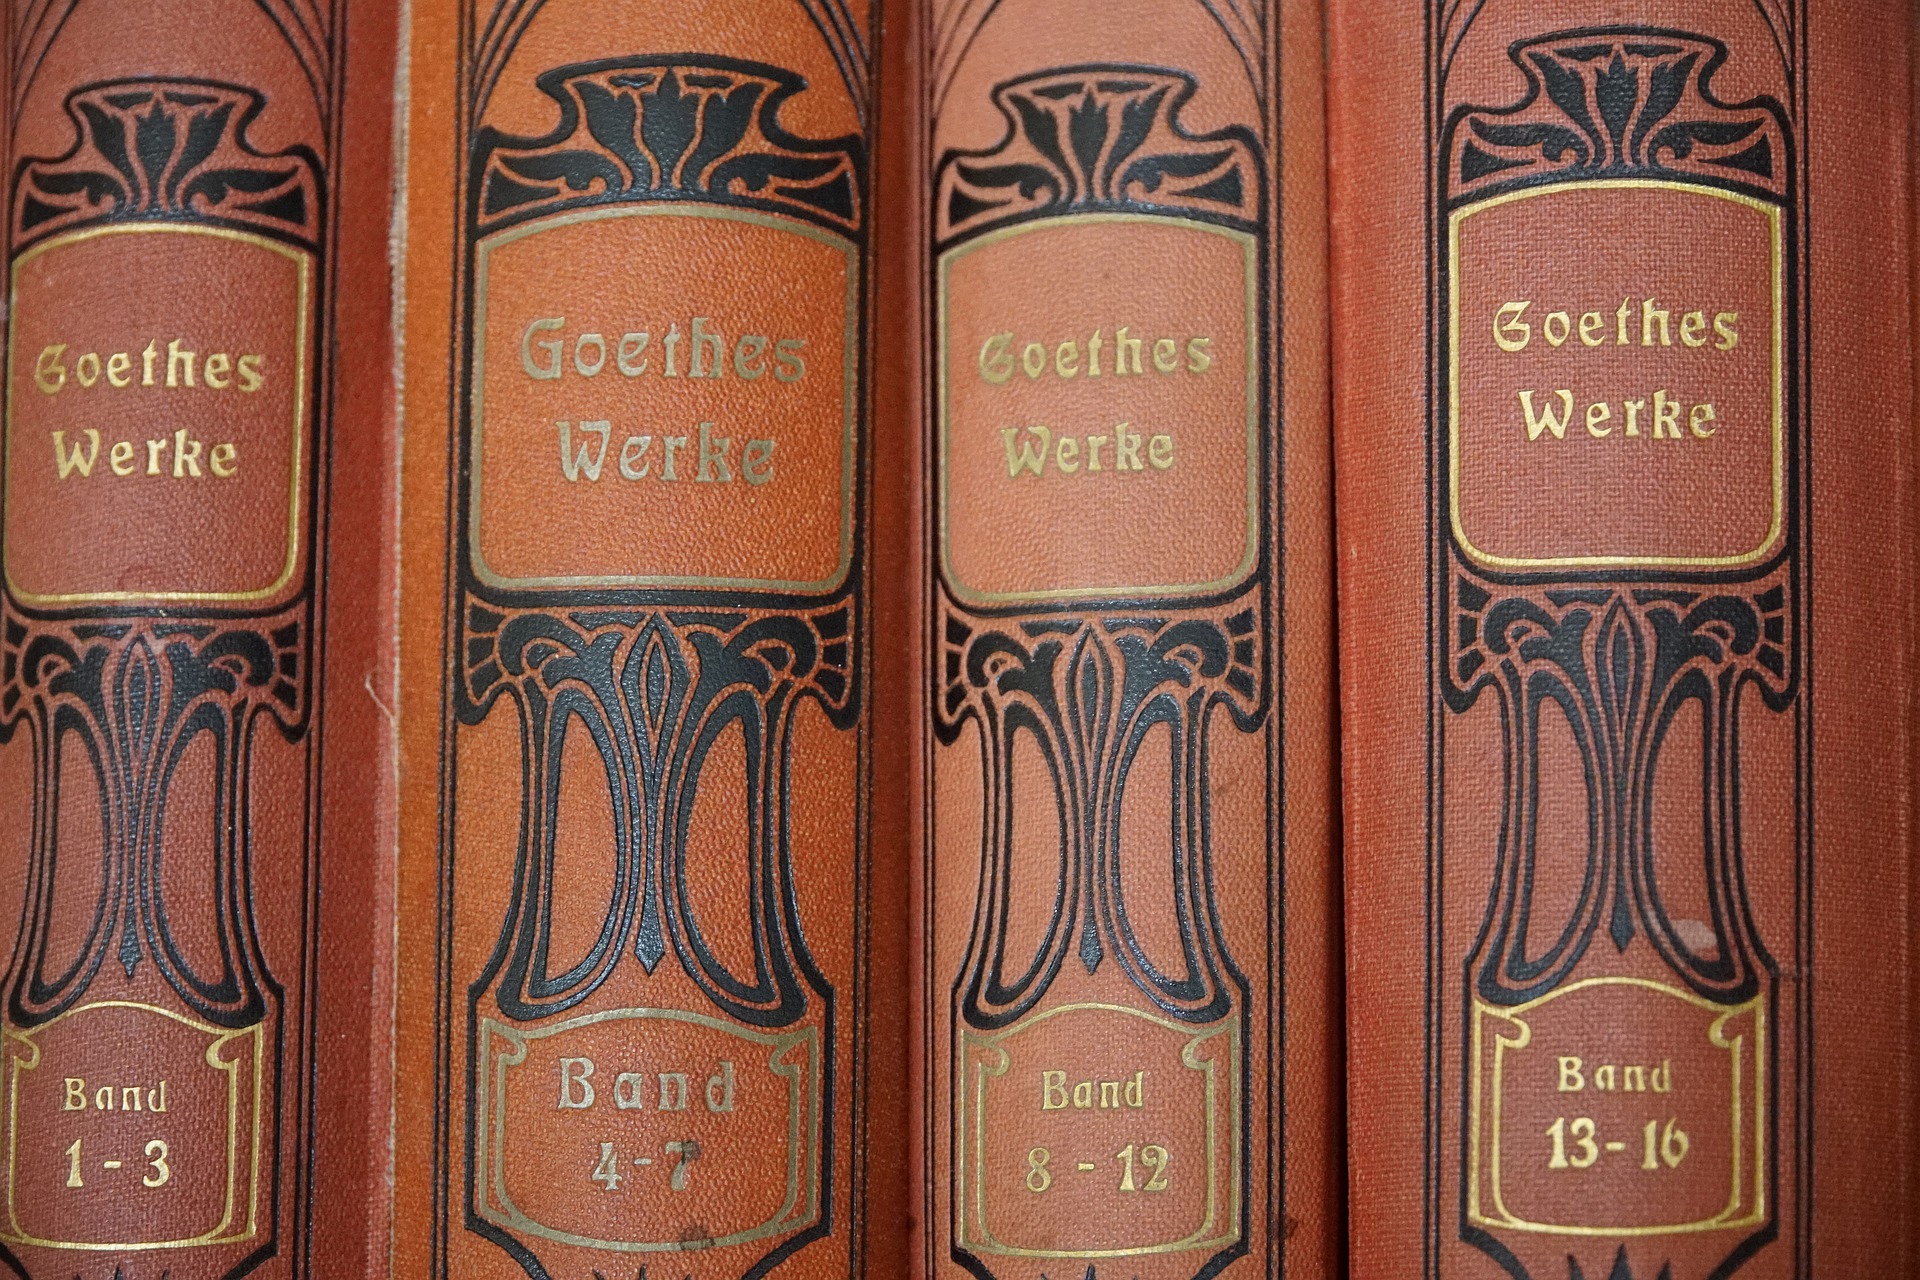 picture of the books from "Goethes Werke"